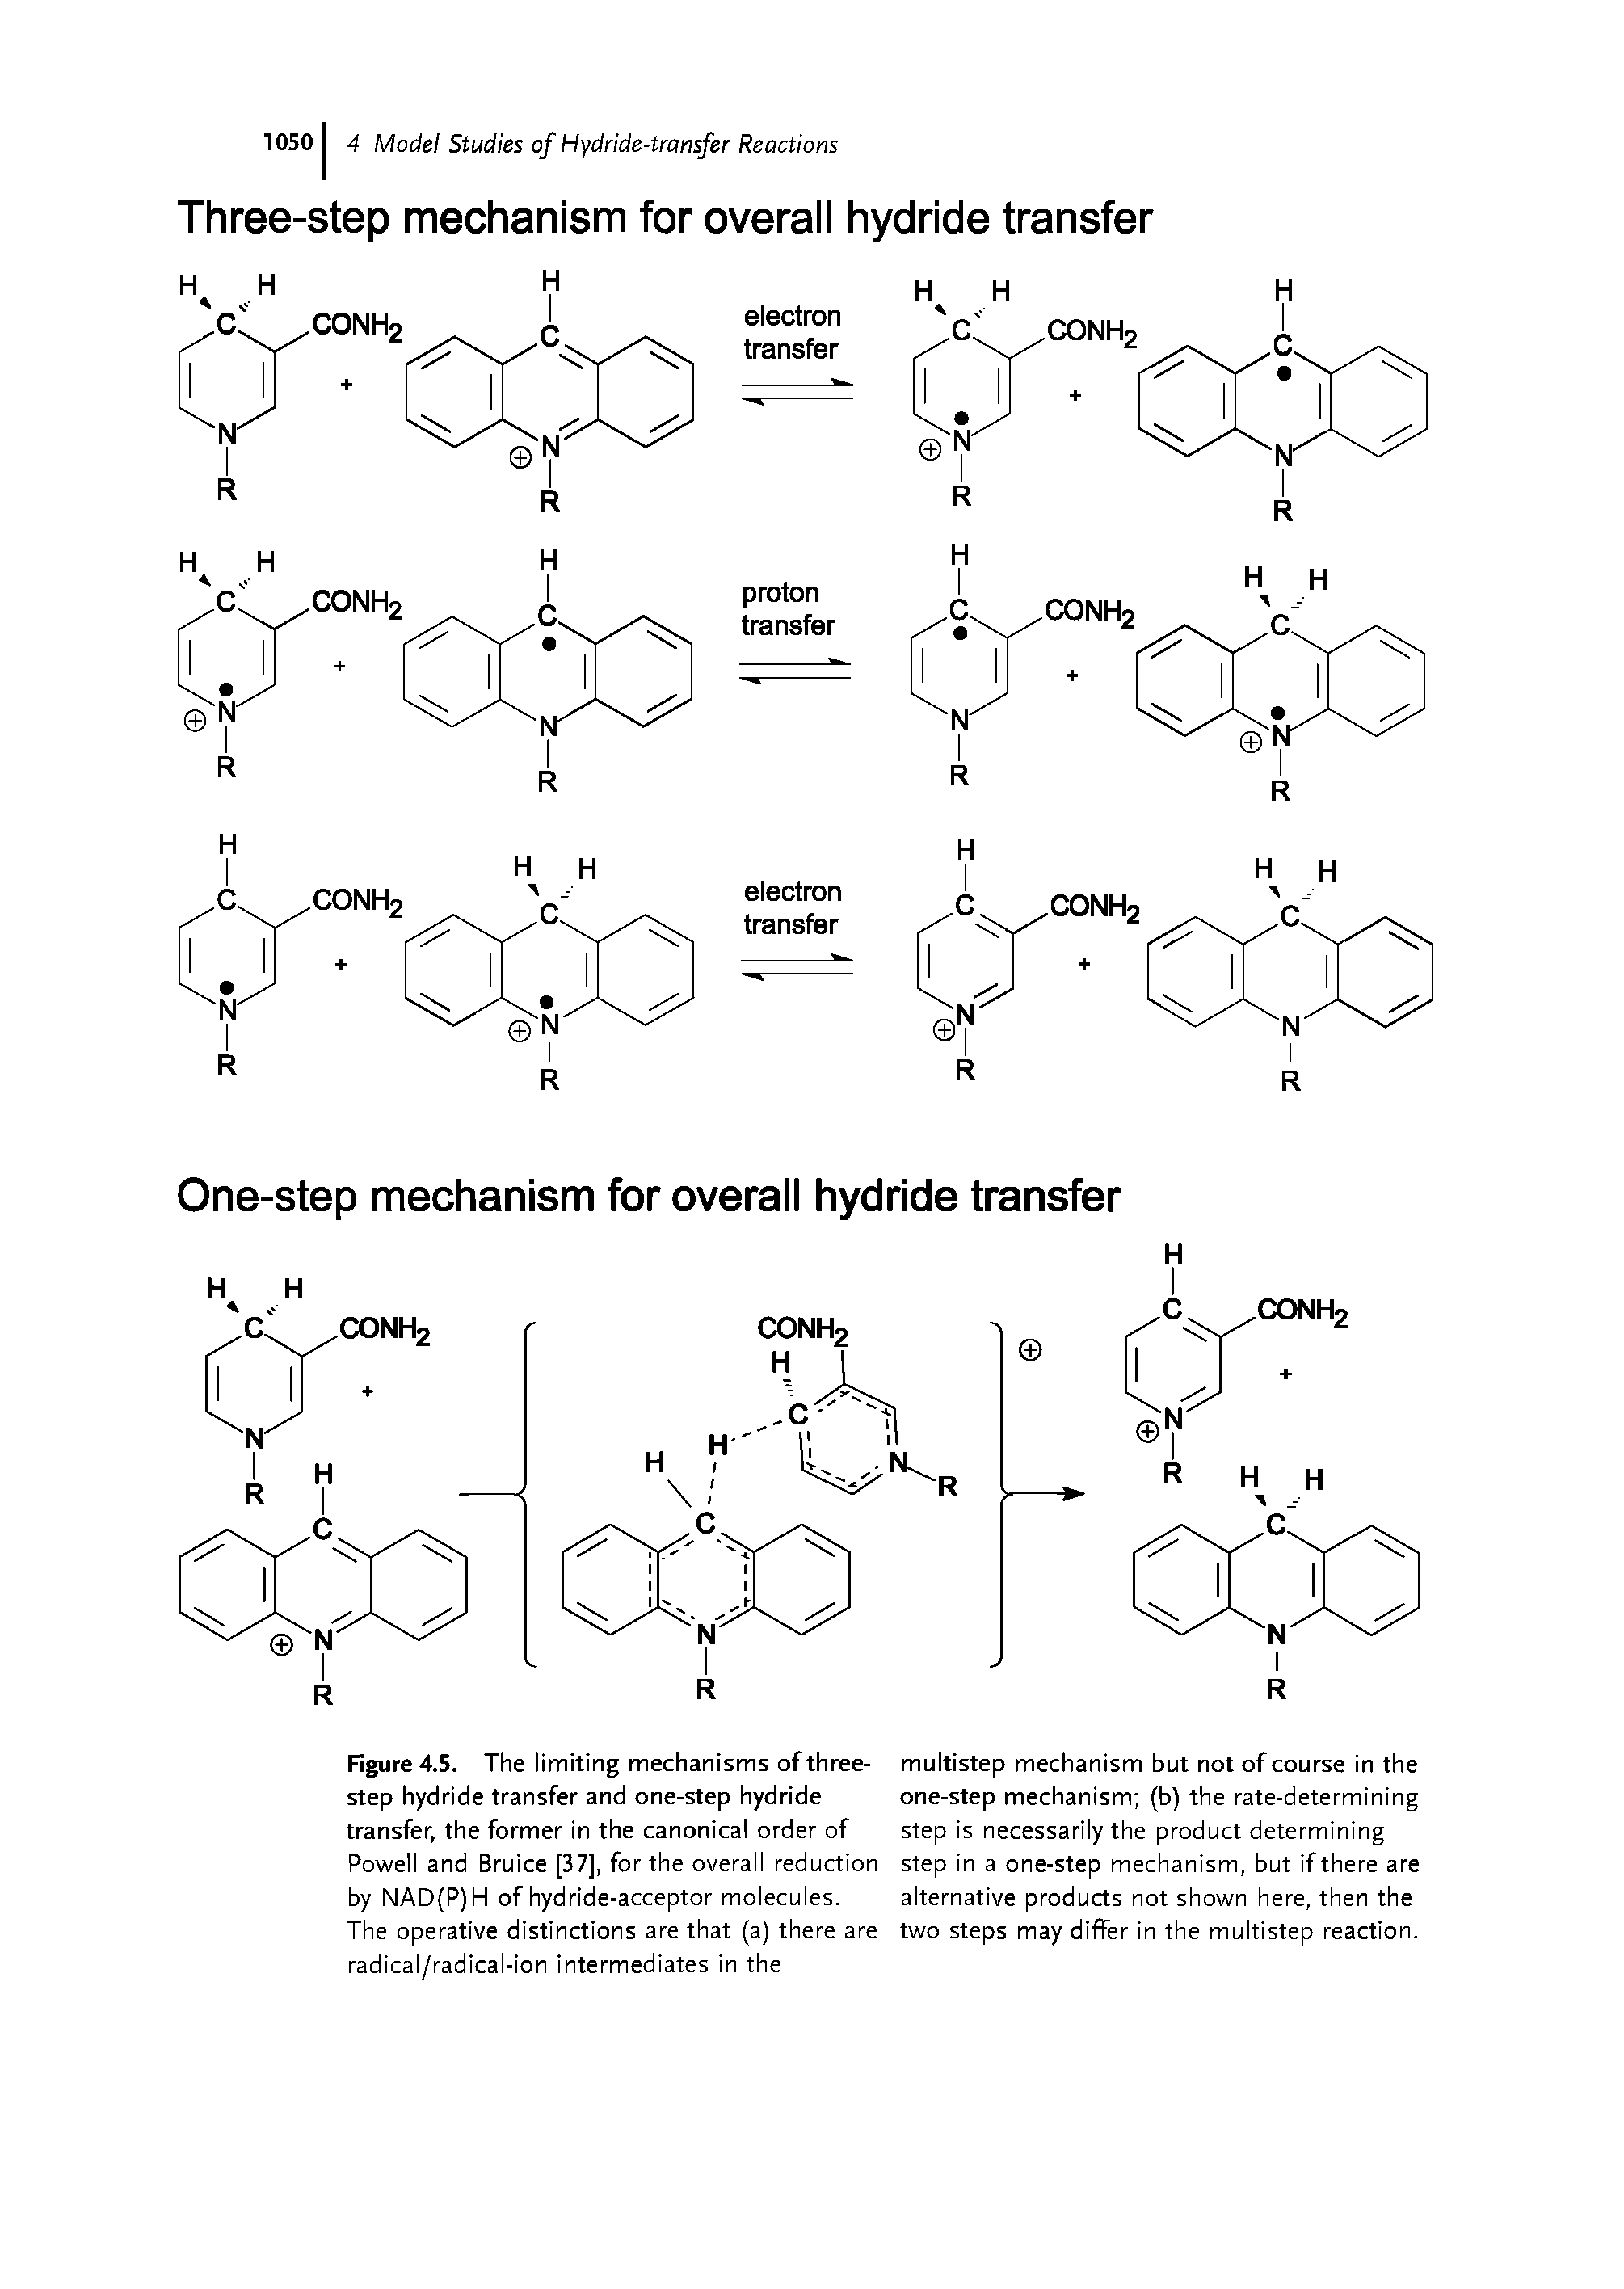 Figure 4.5. The limiting mechanisms of three-step hydride transfer and one-step hydride transfer, the former in the canonical order of Powell and Bruice [37], for the overall reduction by NAD(P)H of hydride-acceptor molecules. The operative distinctions are that (a) there are radical/radical-ion intermediates in the...